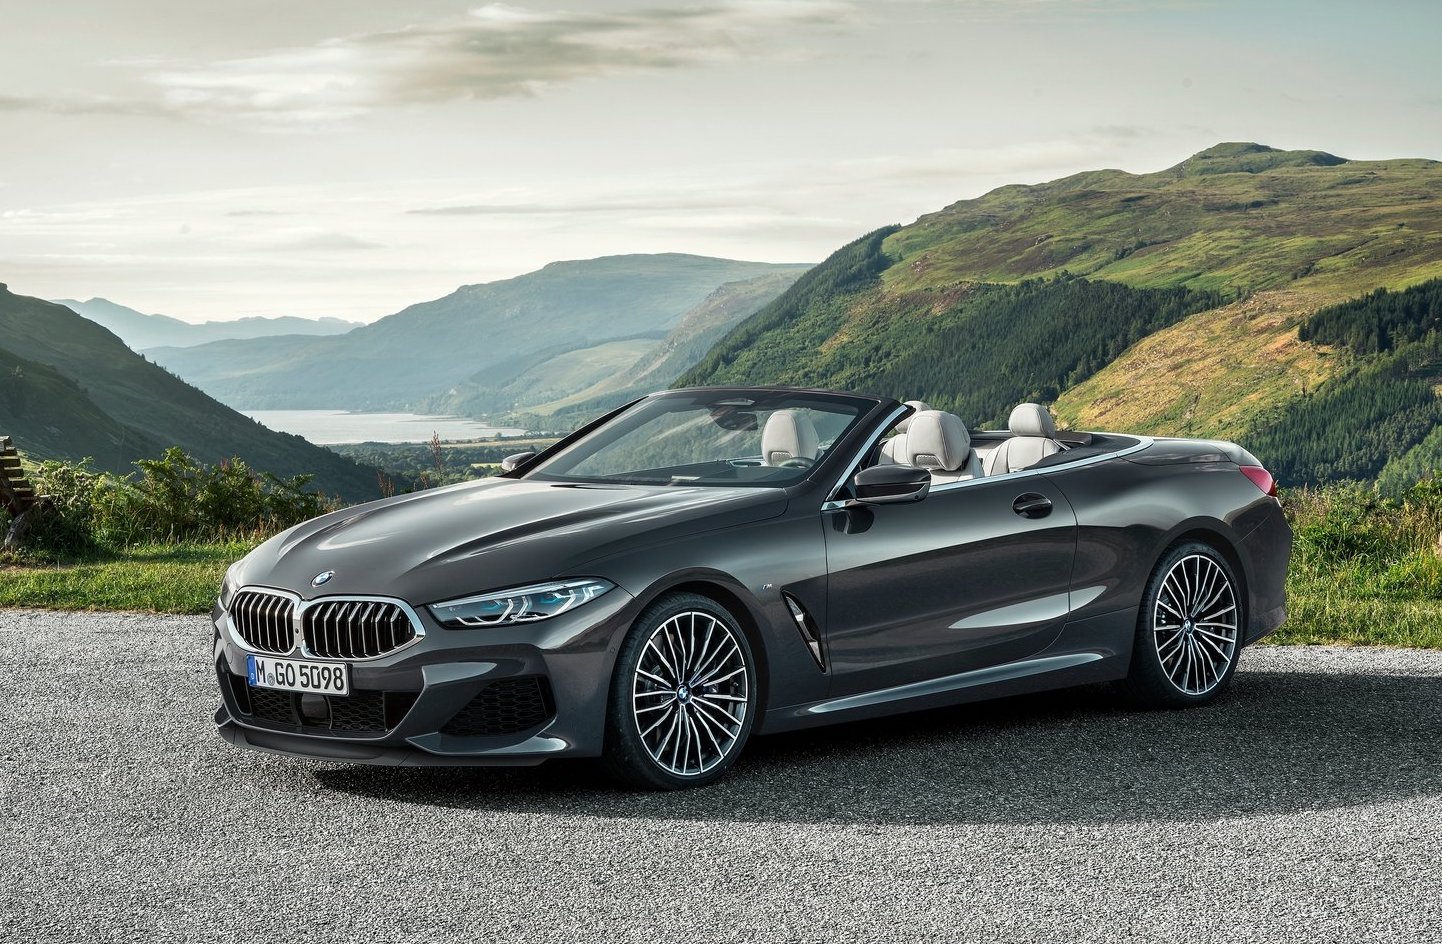 2019 BMW 8 Series Convertible officially unveiled